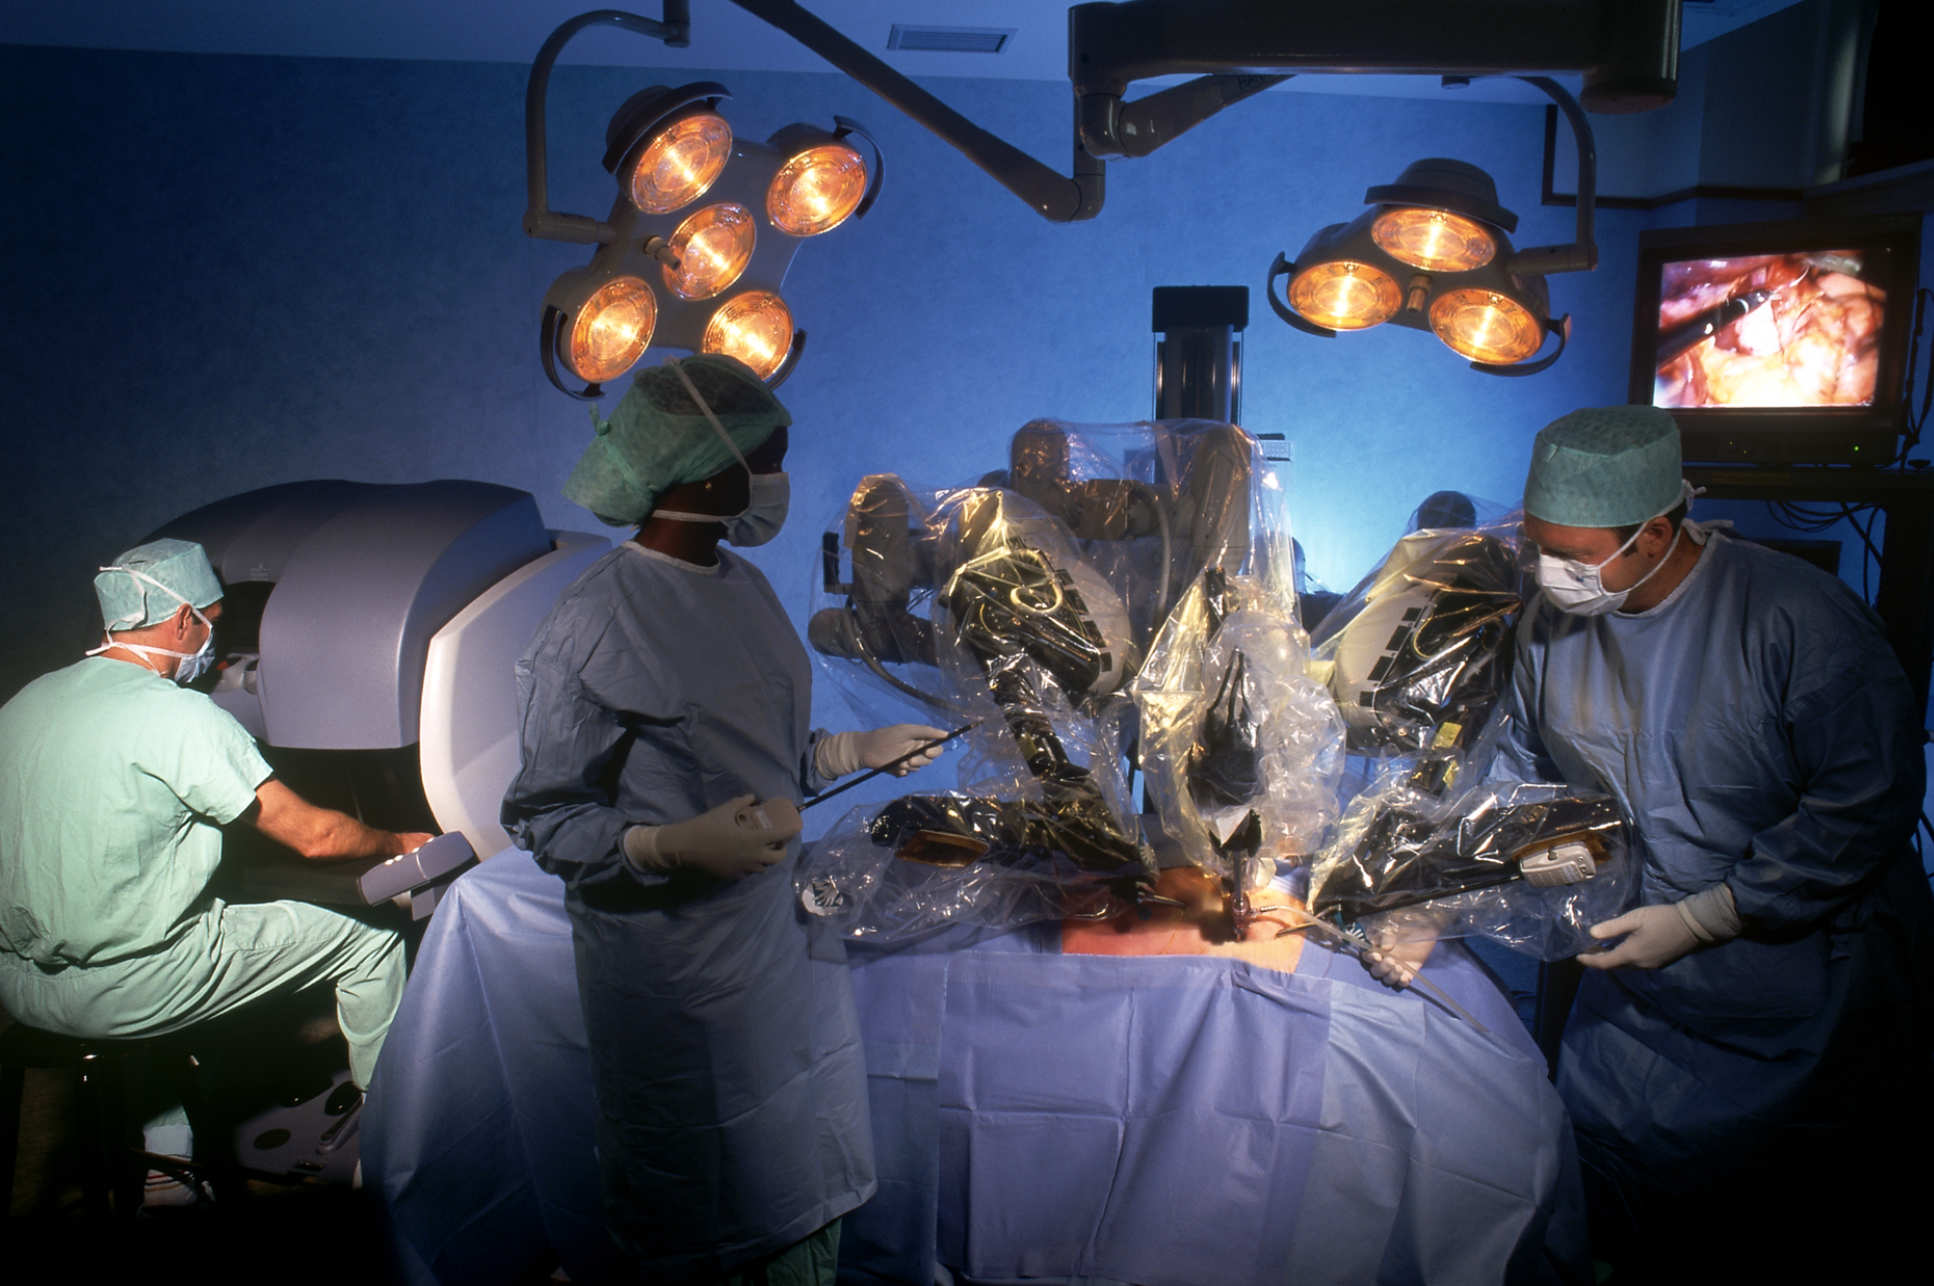 Robot arms over a patient in surgery